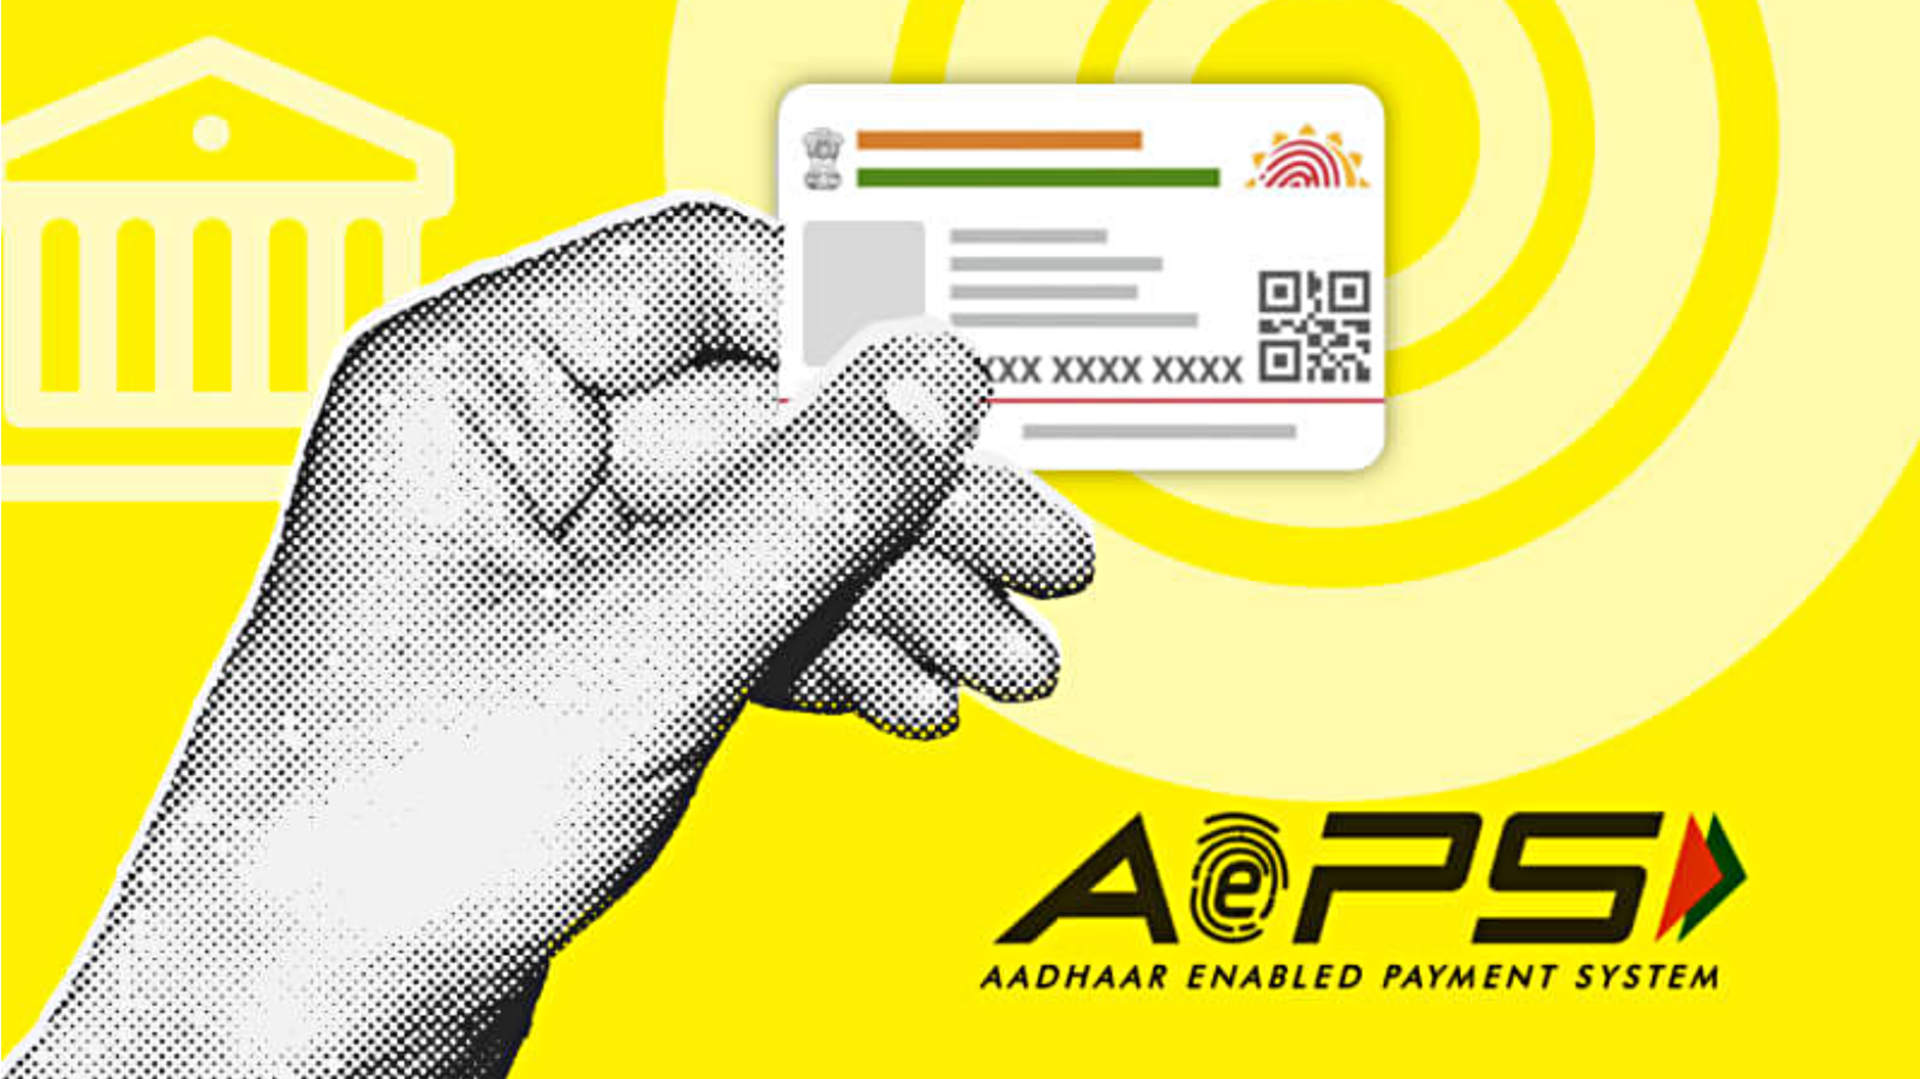 Aadhaar Enabled Payment System: Features and how to use explained